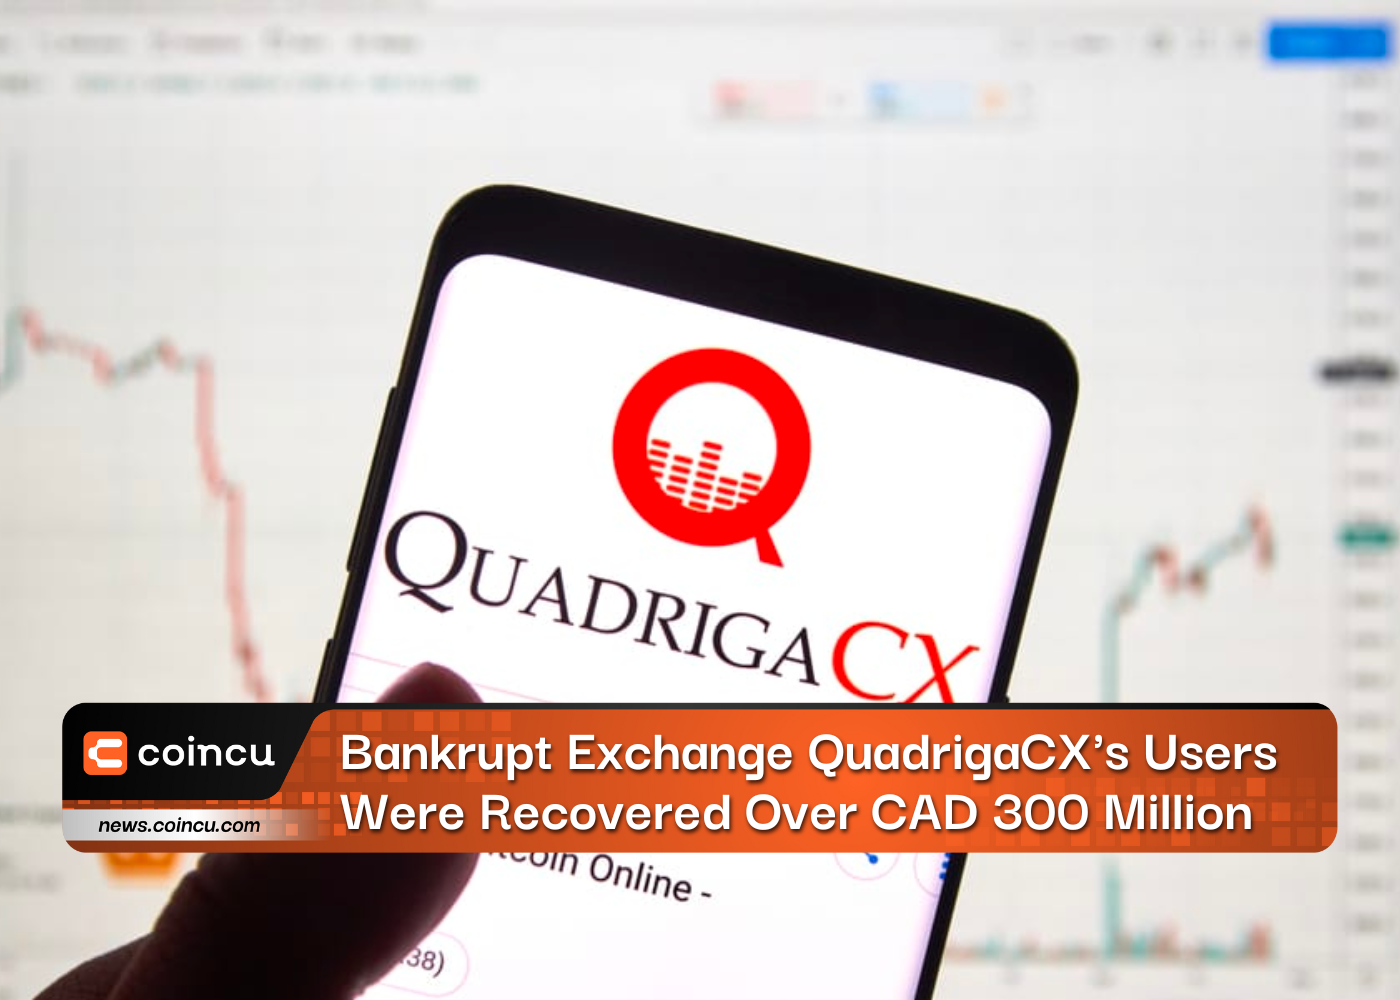 Bankrupt Exchange QuadrigaCX's Users Were Recovered Over CAD 300 Million